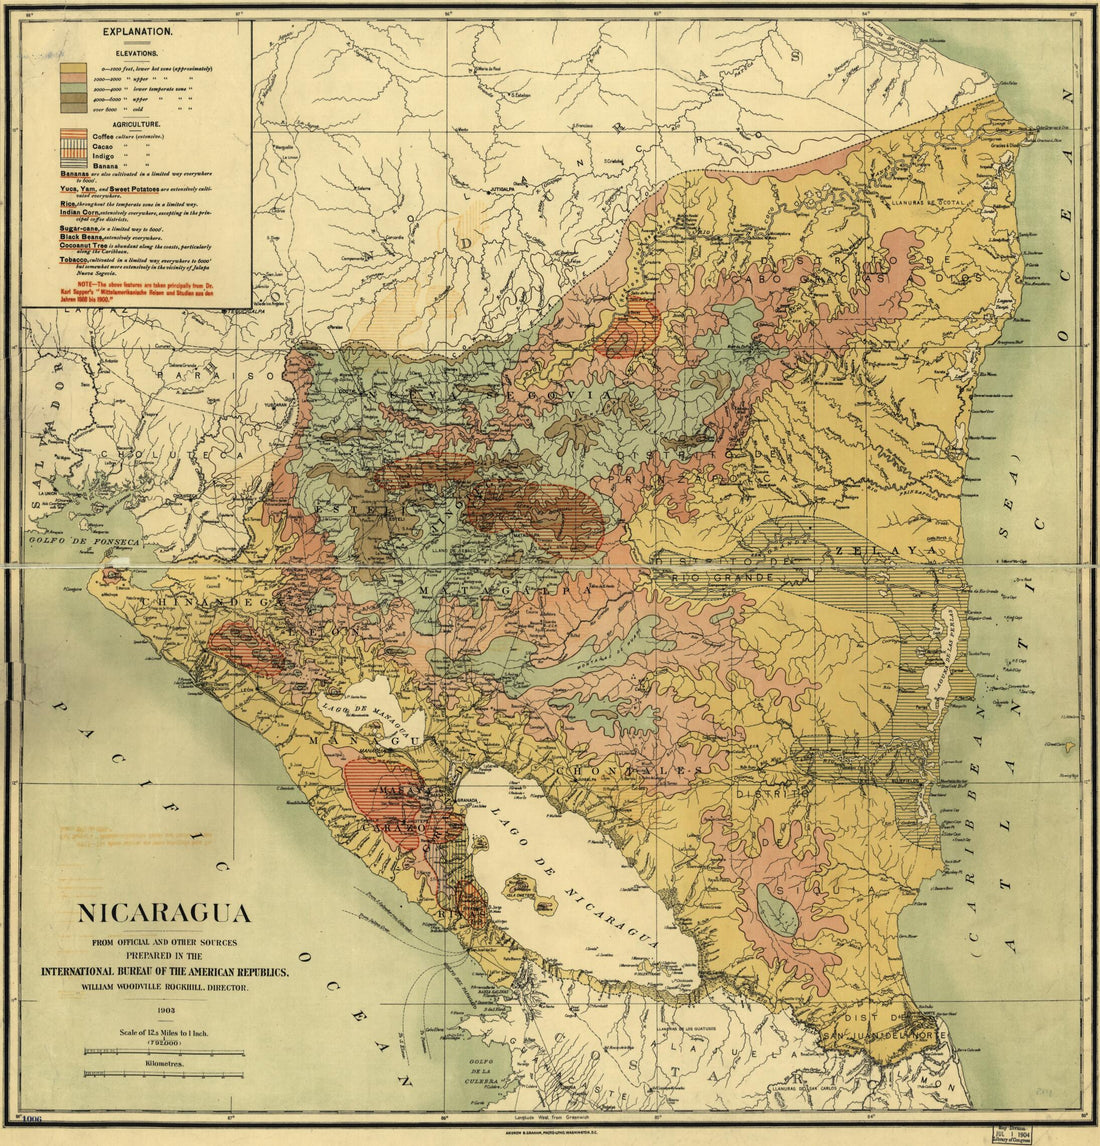 This old map of Nicaragua from 1903 was created by  International Bureau of the American Republics, William Woodville Rockhill in 1903